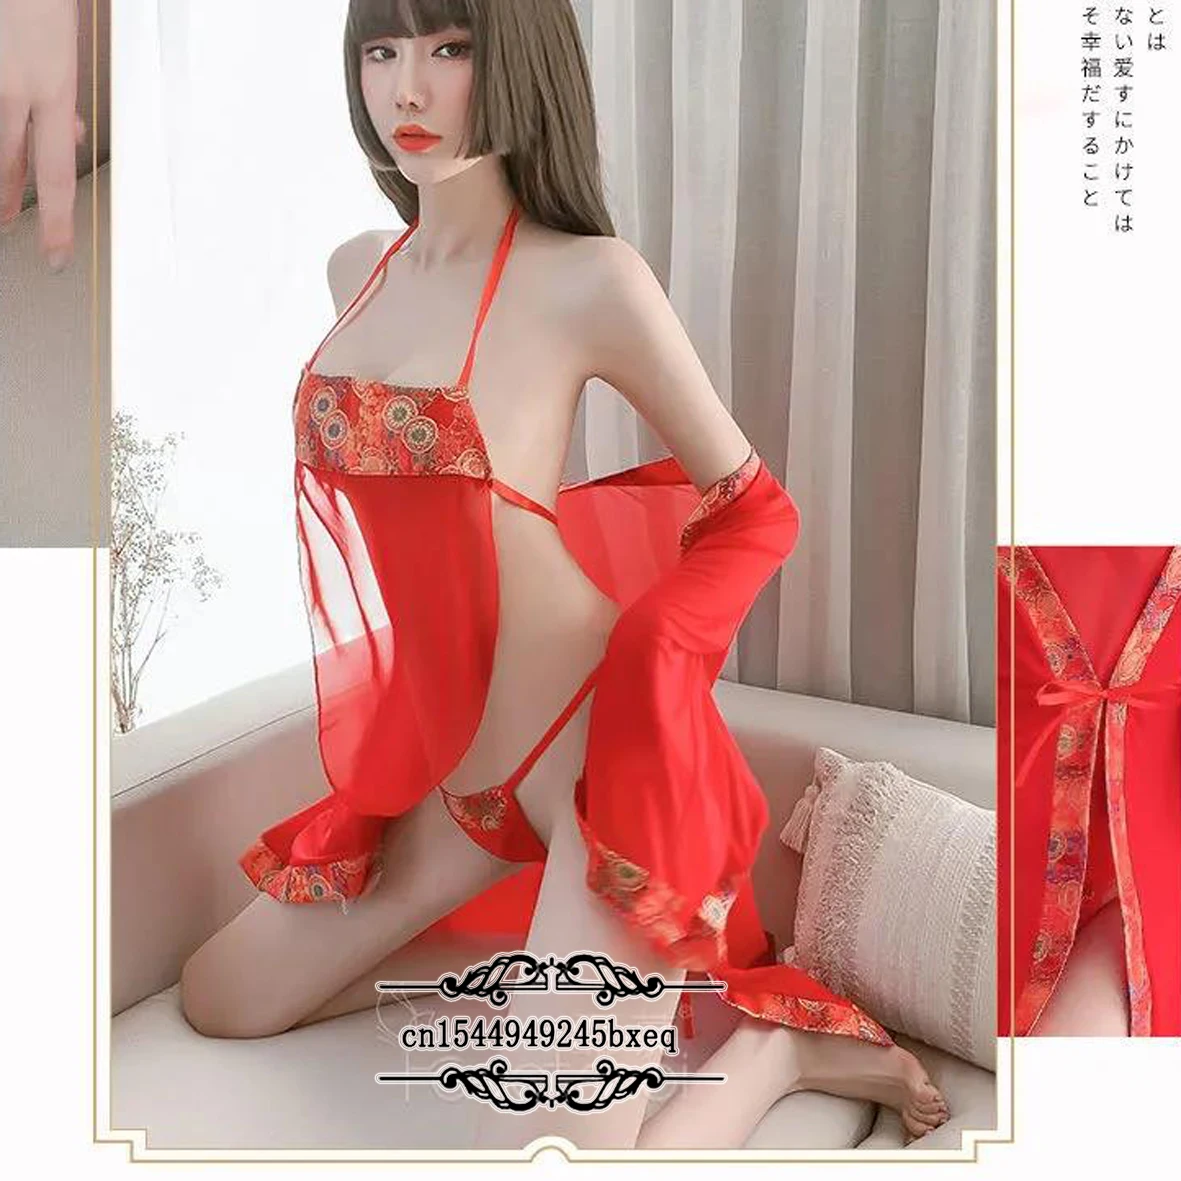 

Large Size Sexy Lingerie, Female Ancient Court, Chinese Style, See-through Bellyband, Open File, Extreme Temptation, Nightgown